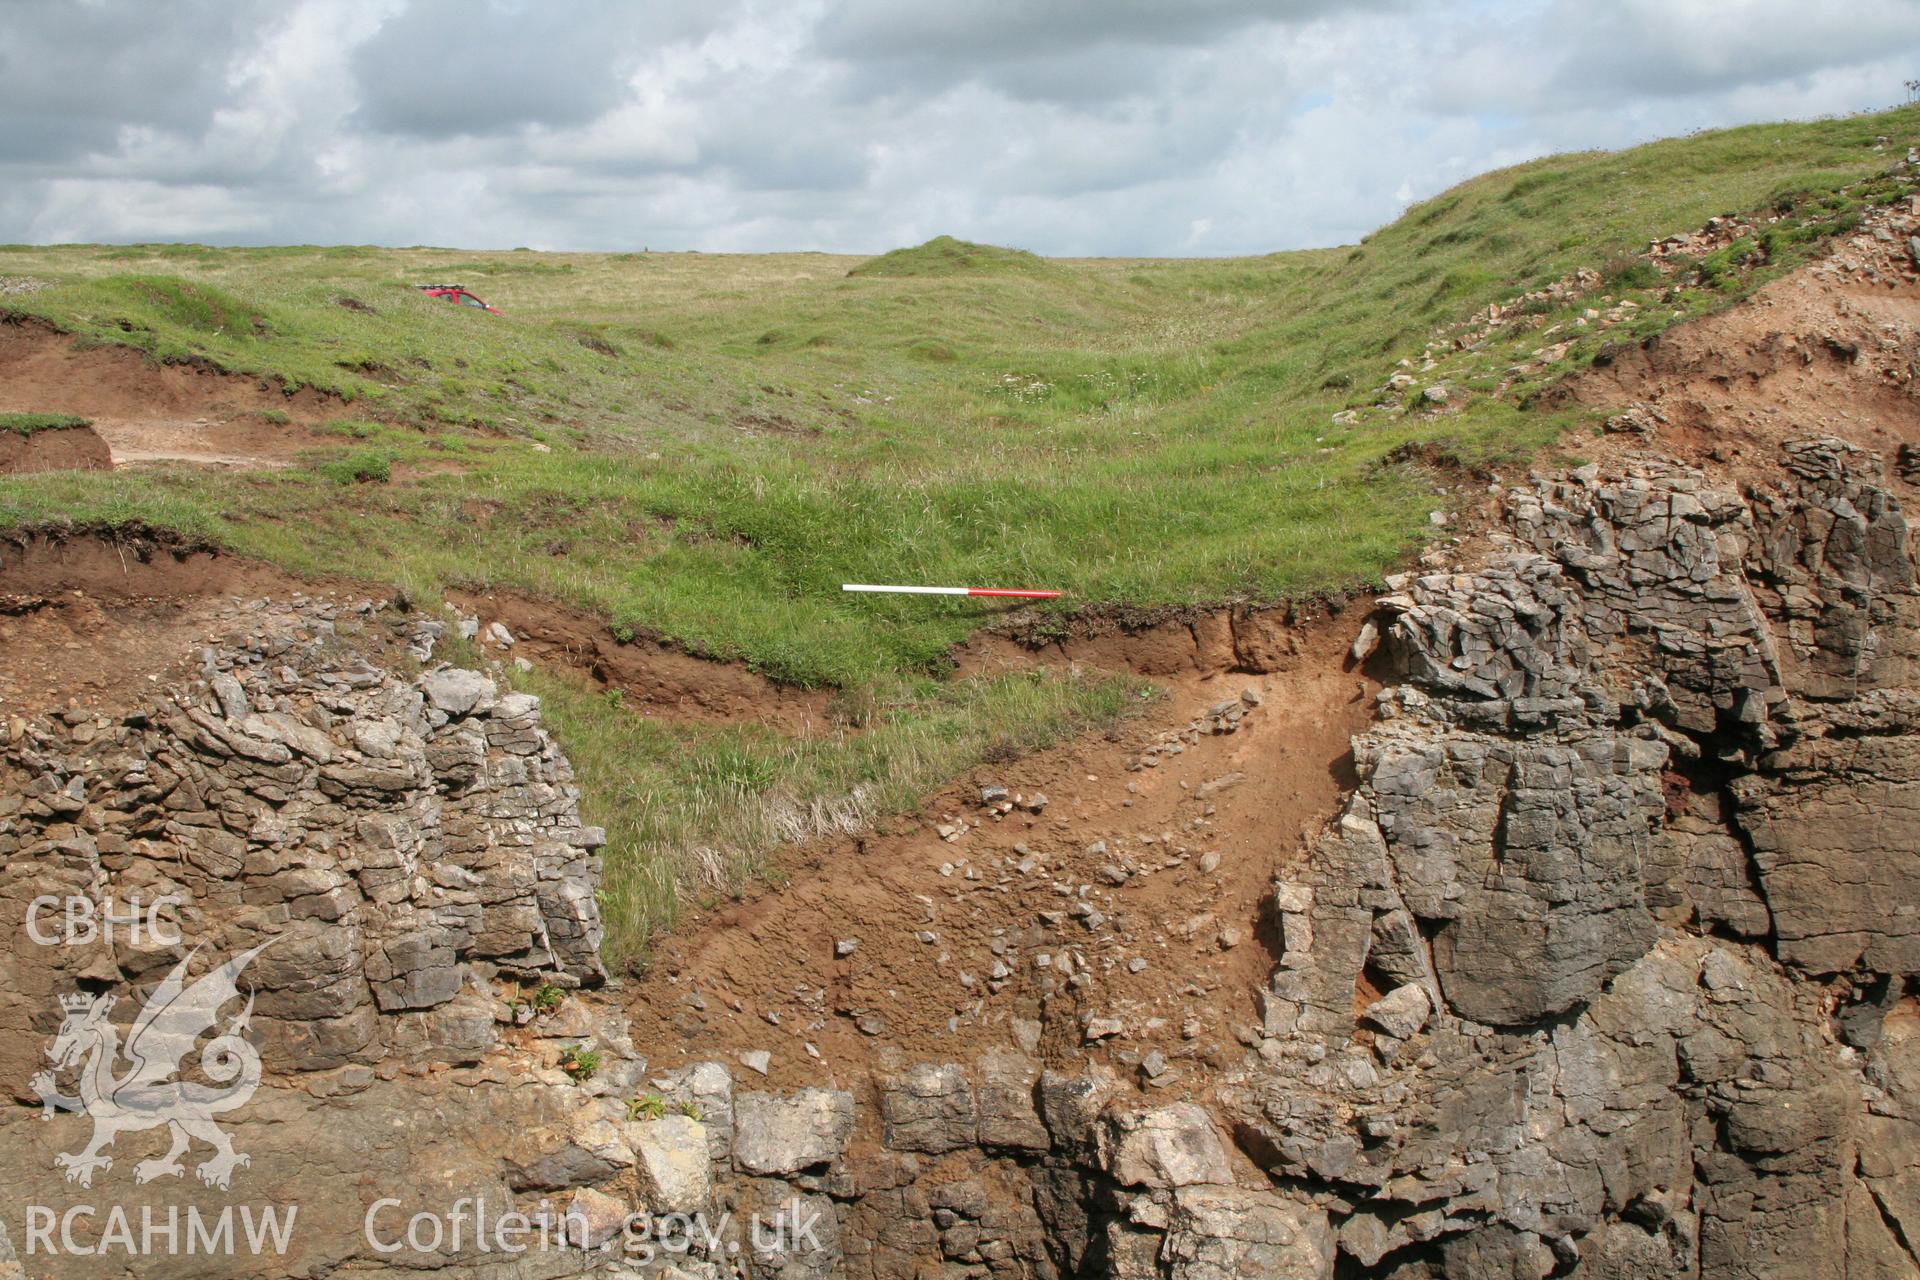 Eroded section showing the rock cut outer rampart ditch of the defences to the west of the fort entrance.